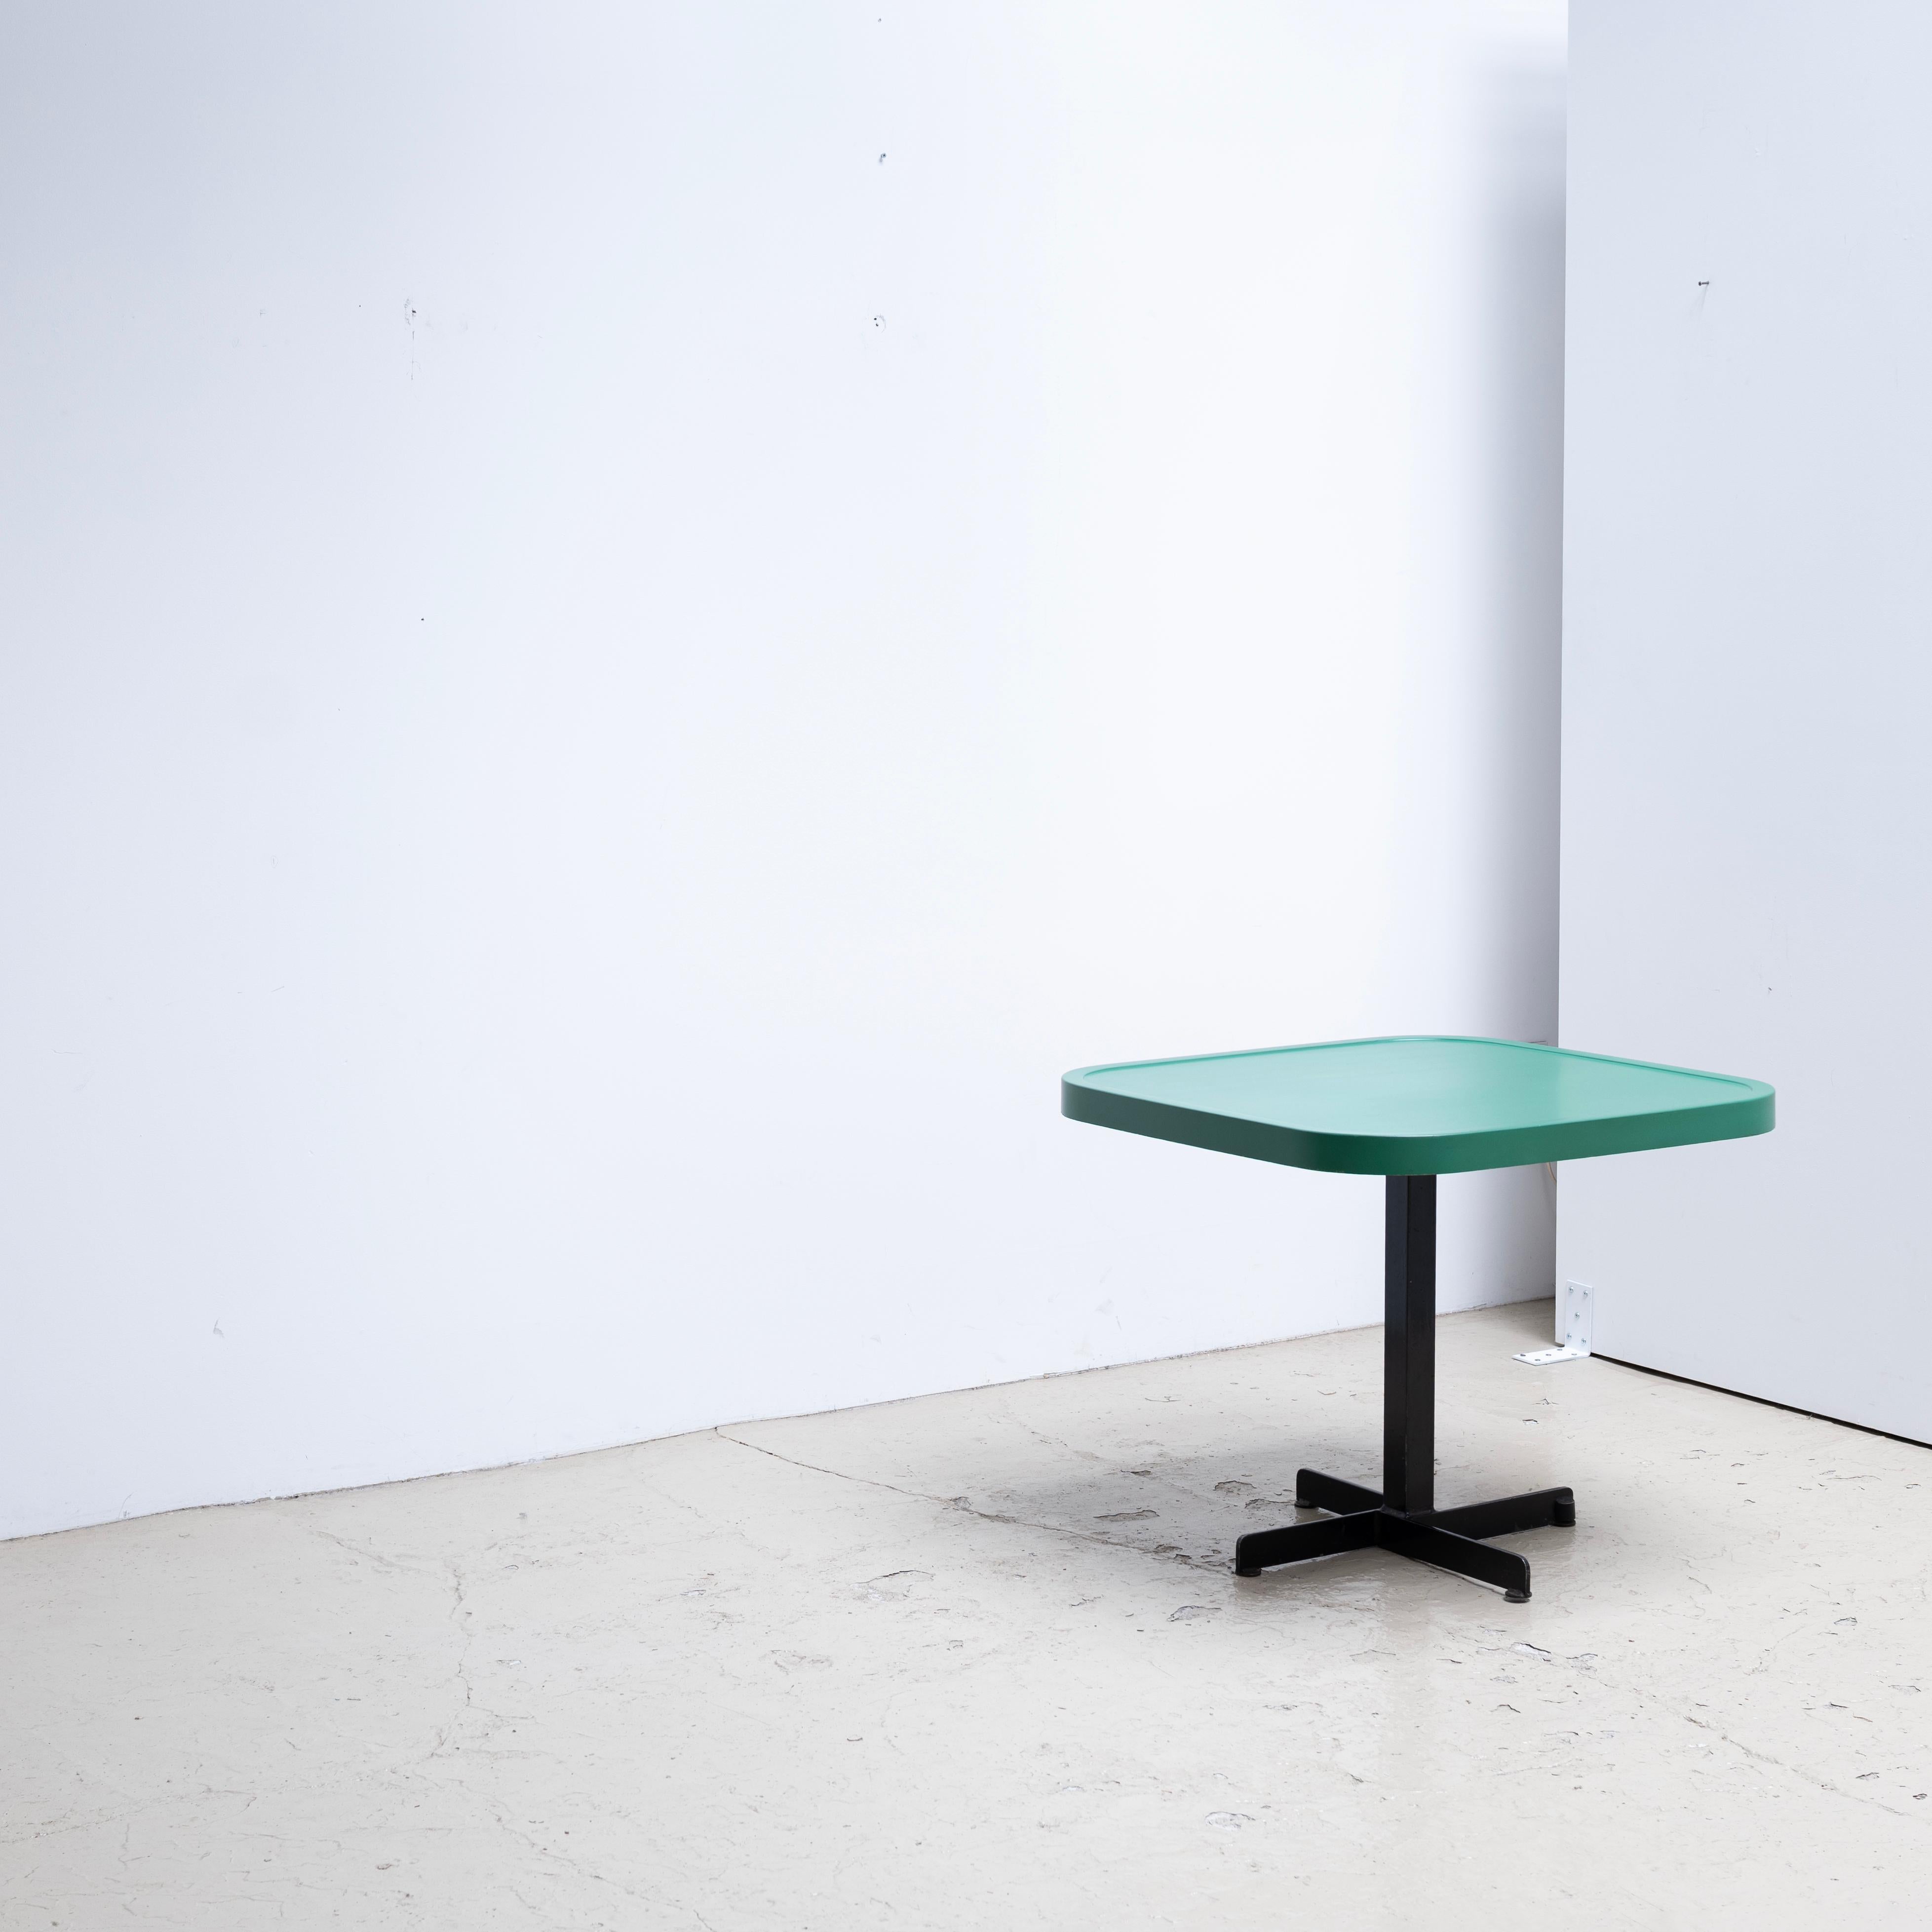 French Charlotte Perriand Square Table for Les Arcs